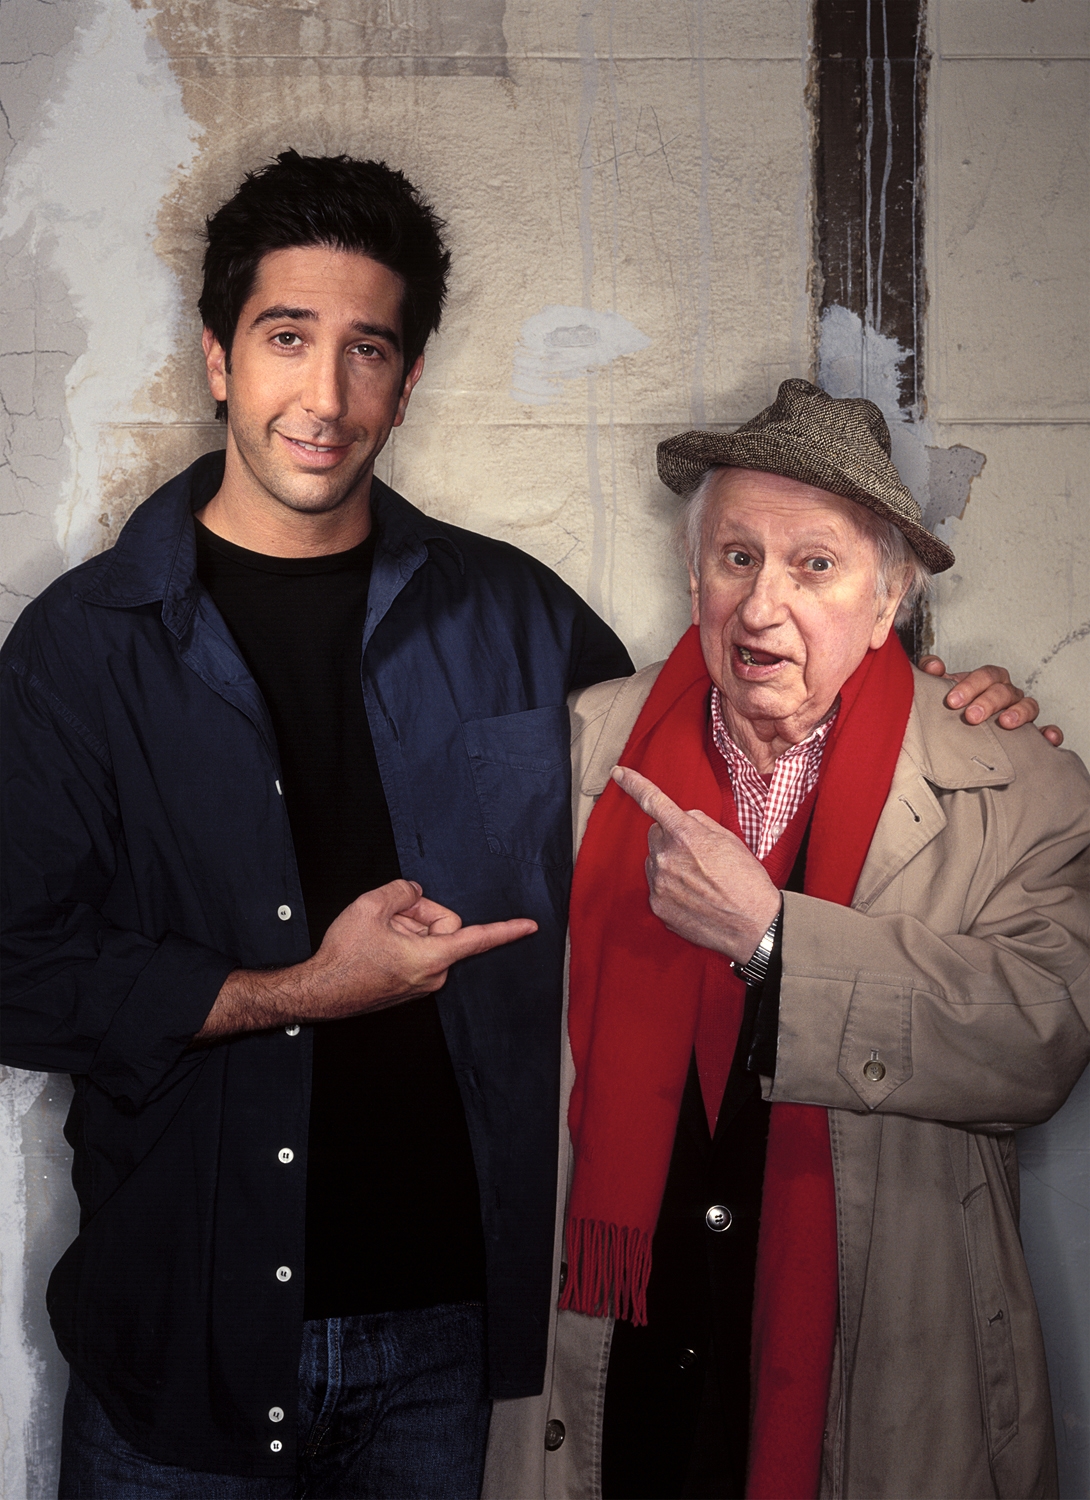 David Schwimmer, Actor and Director / Studs Turkel, Actor and Writer